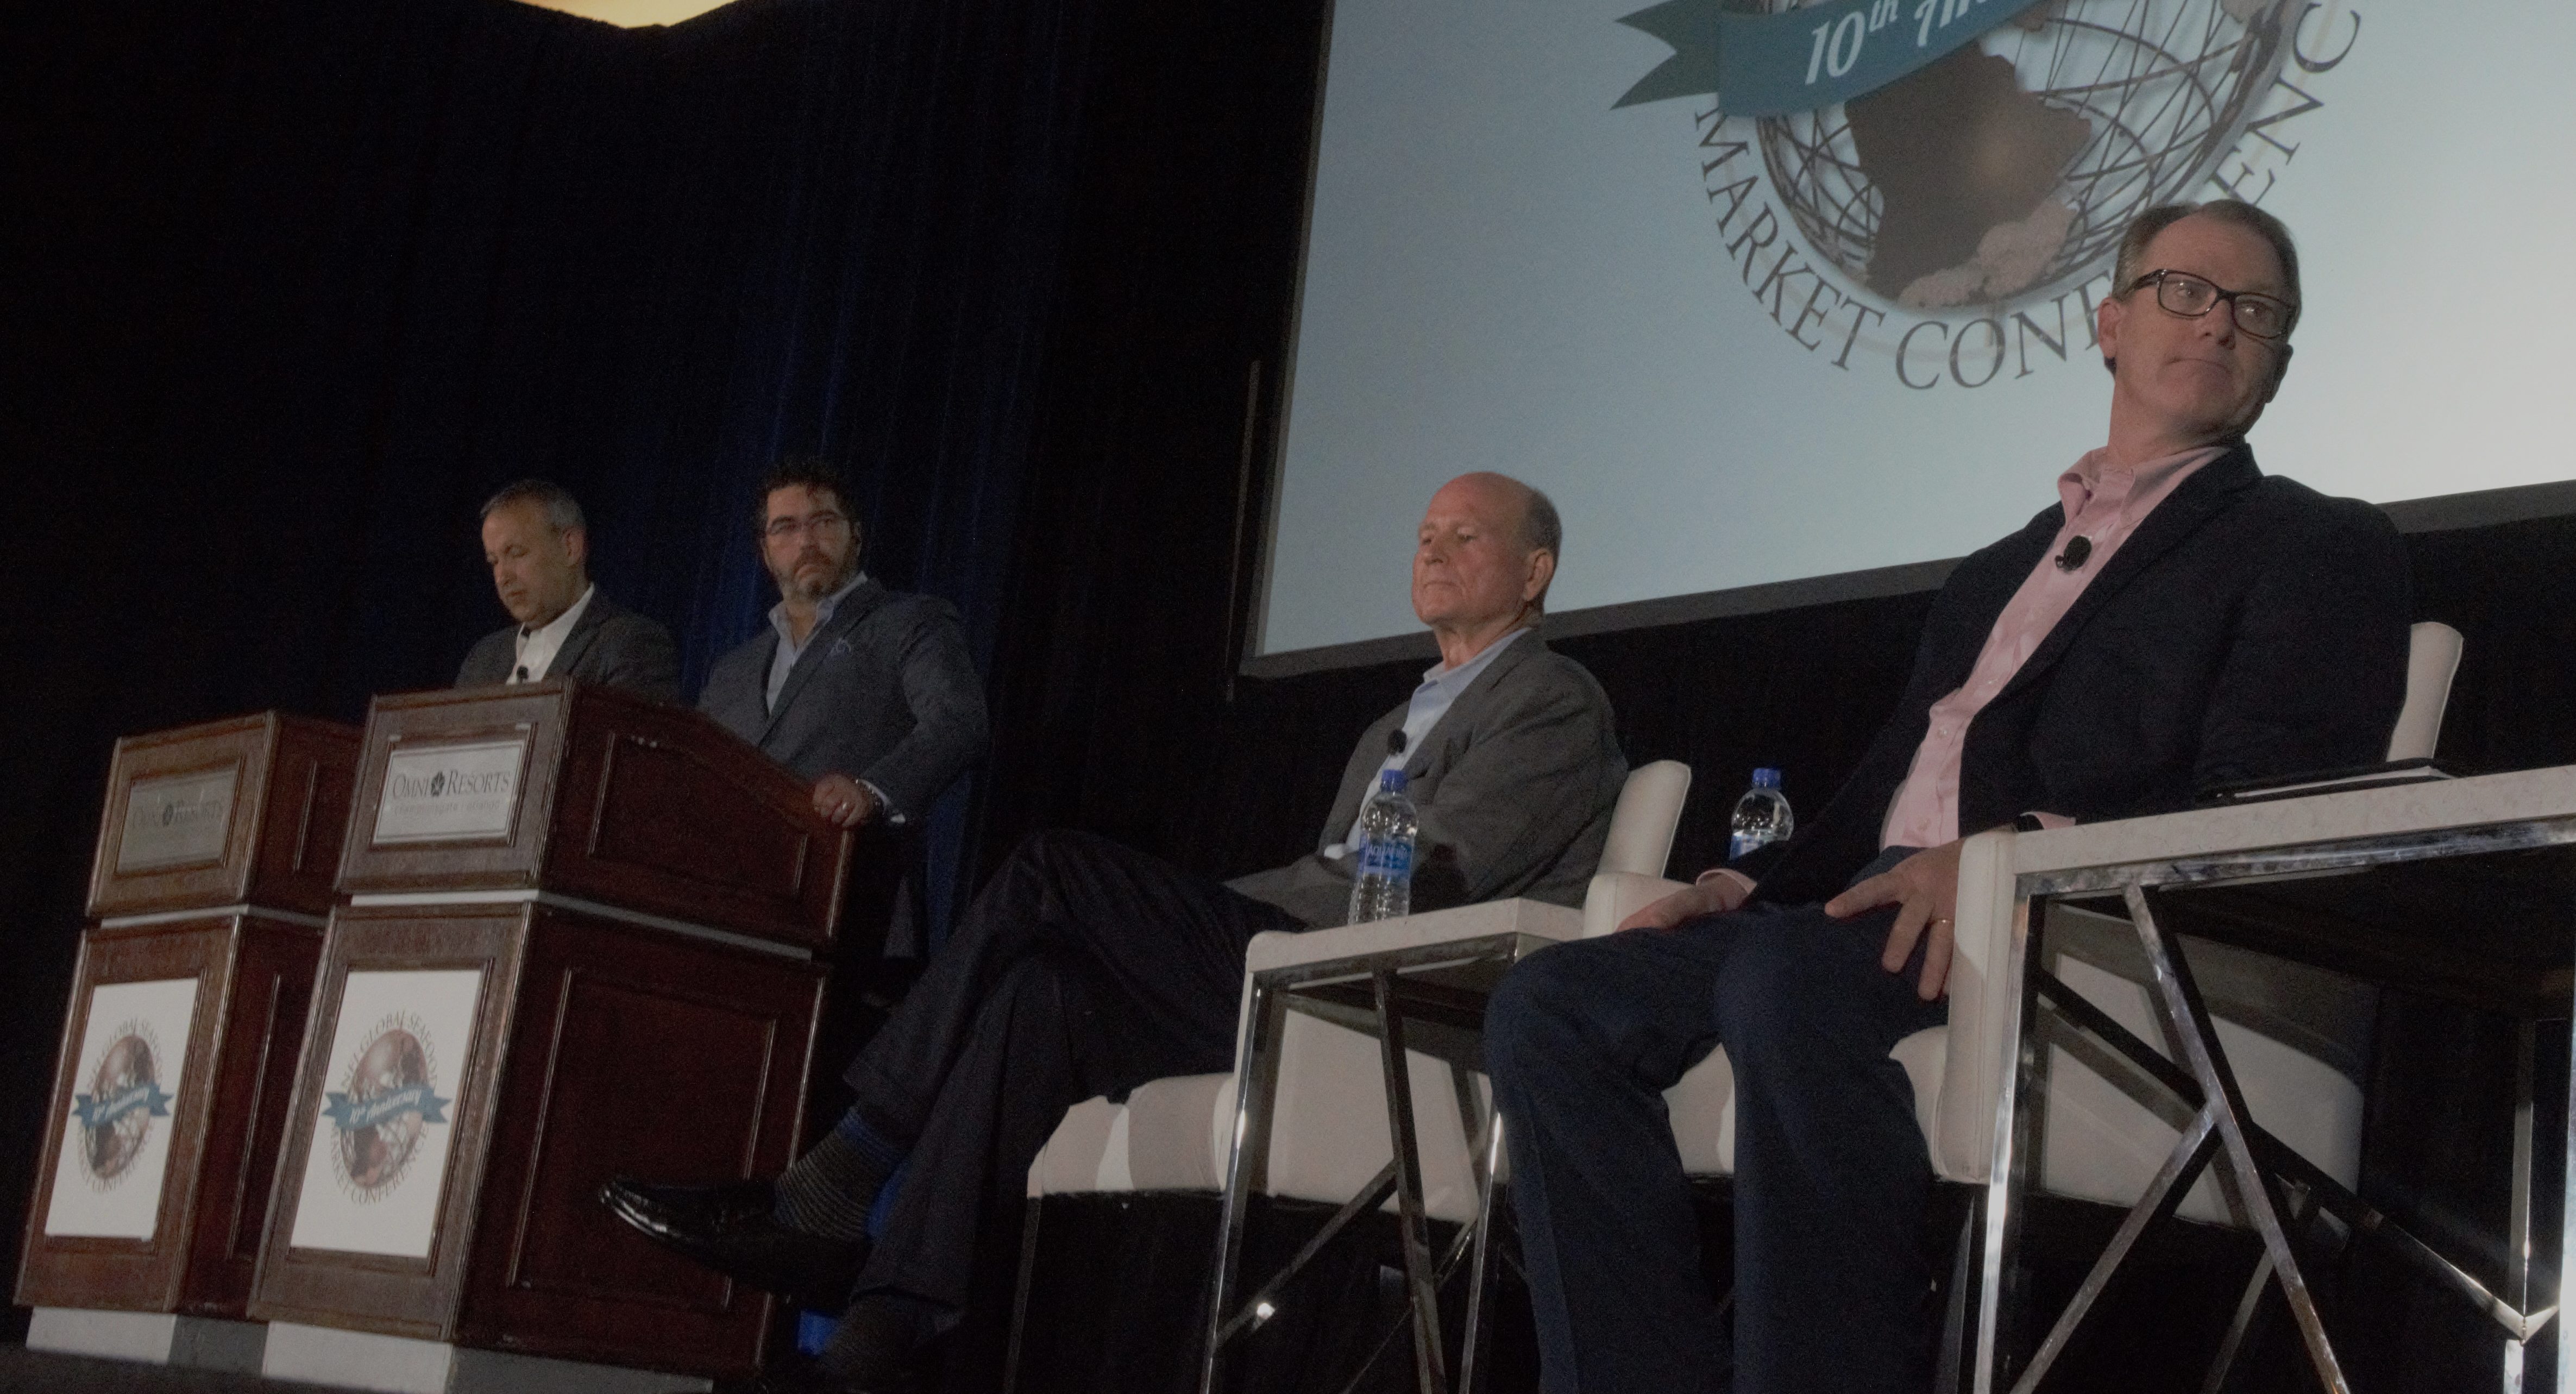 Recap Undercurrent's coverage of the Global Seafood Market Conference